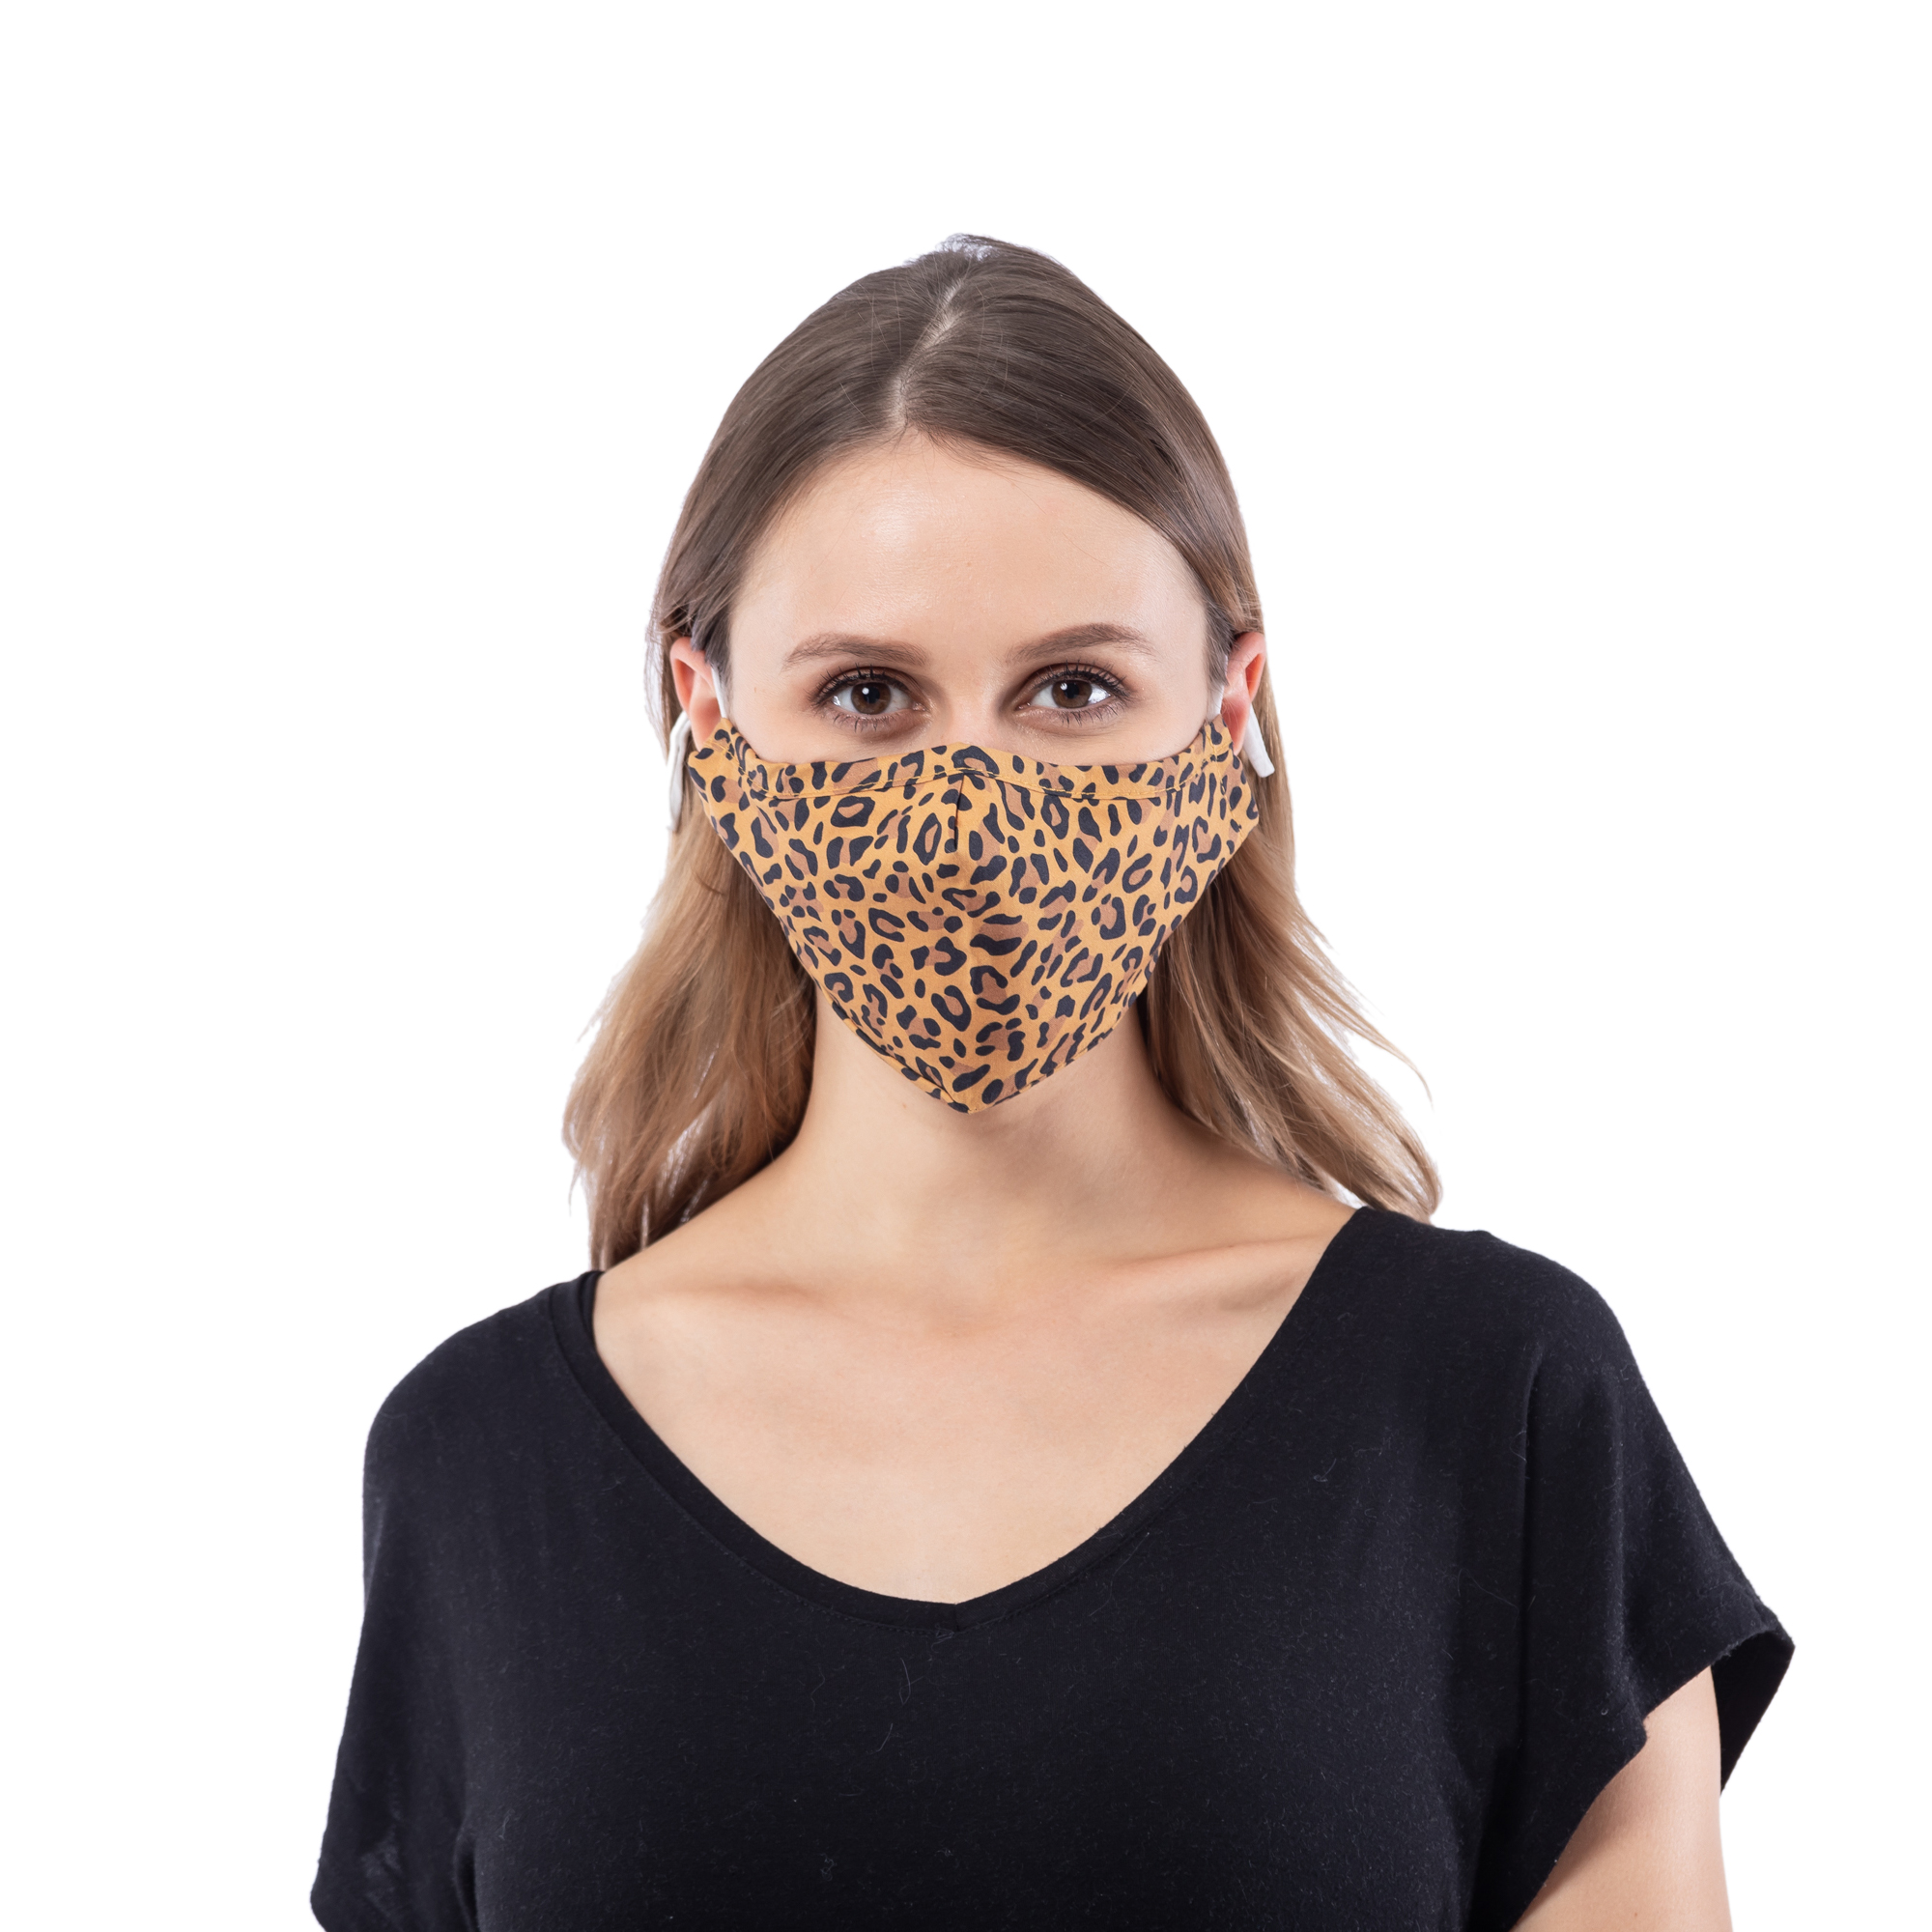 Adult 4-Layer Cotton Mask - Includes 1 Replaceable PM2.5 Filter and Adjustable Ear Straps - LEOPARD